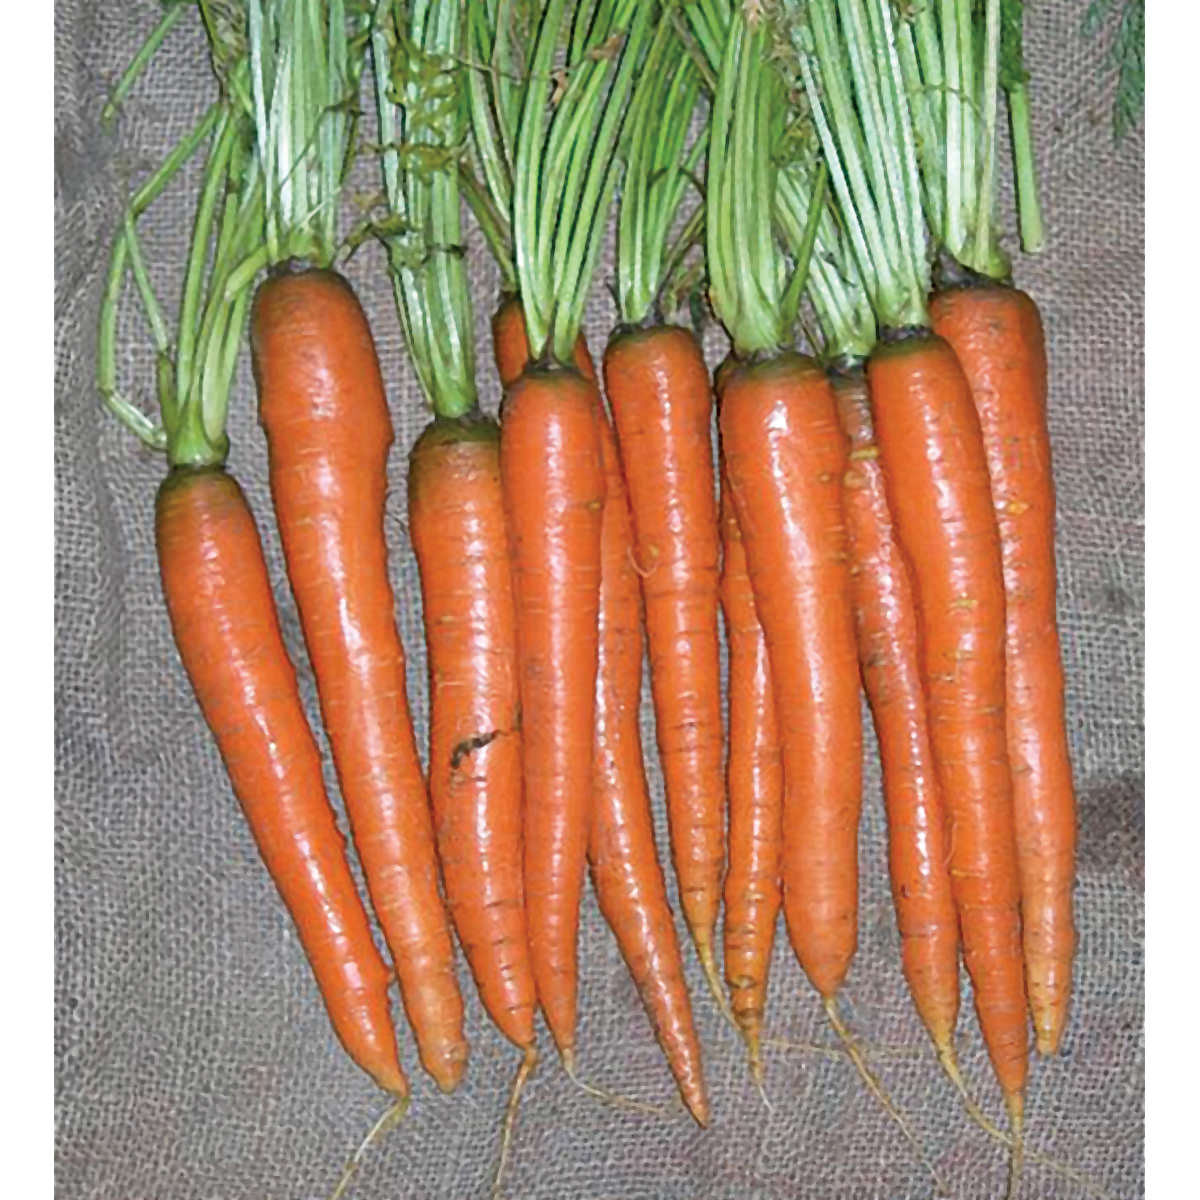 Imperator Carrot Seeds 500 SEEDS-SAME DAY SHIPPING